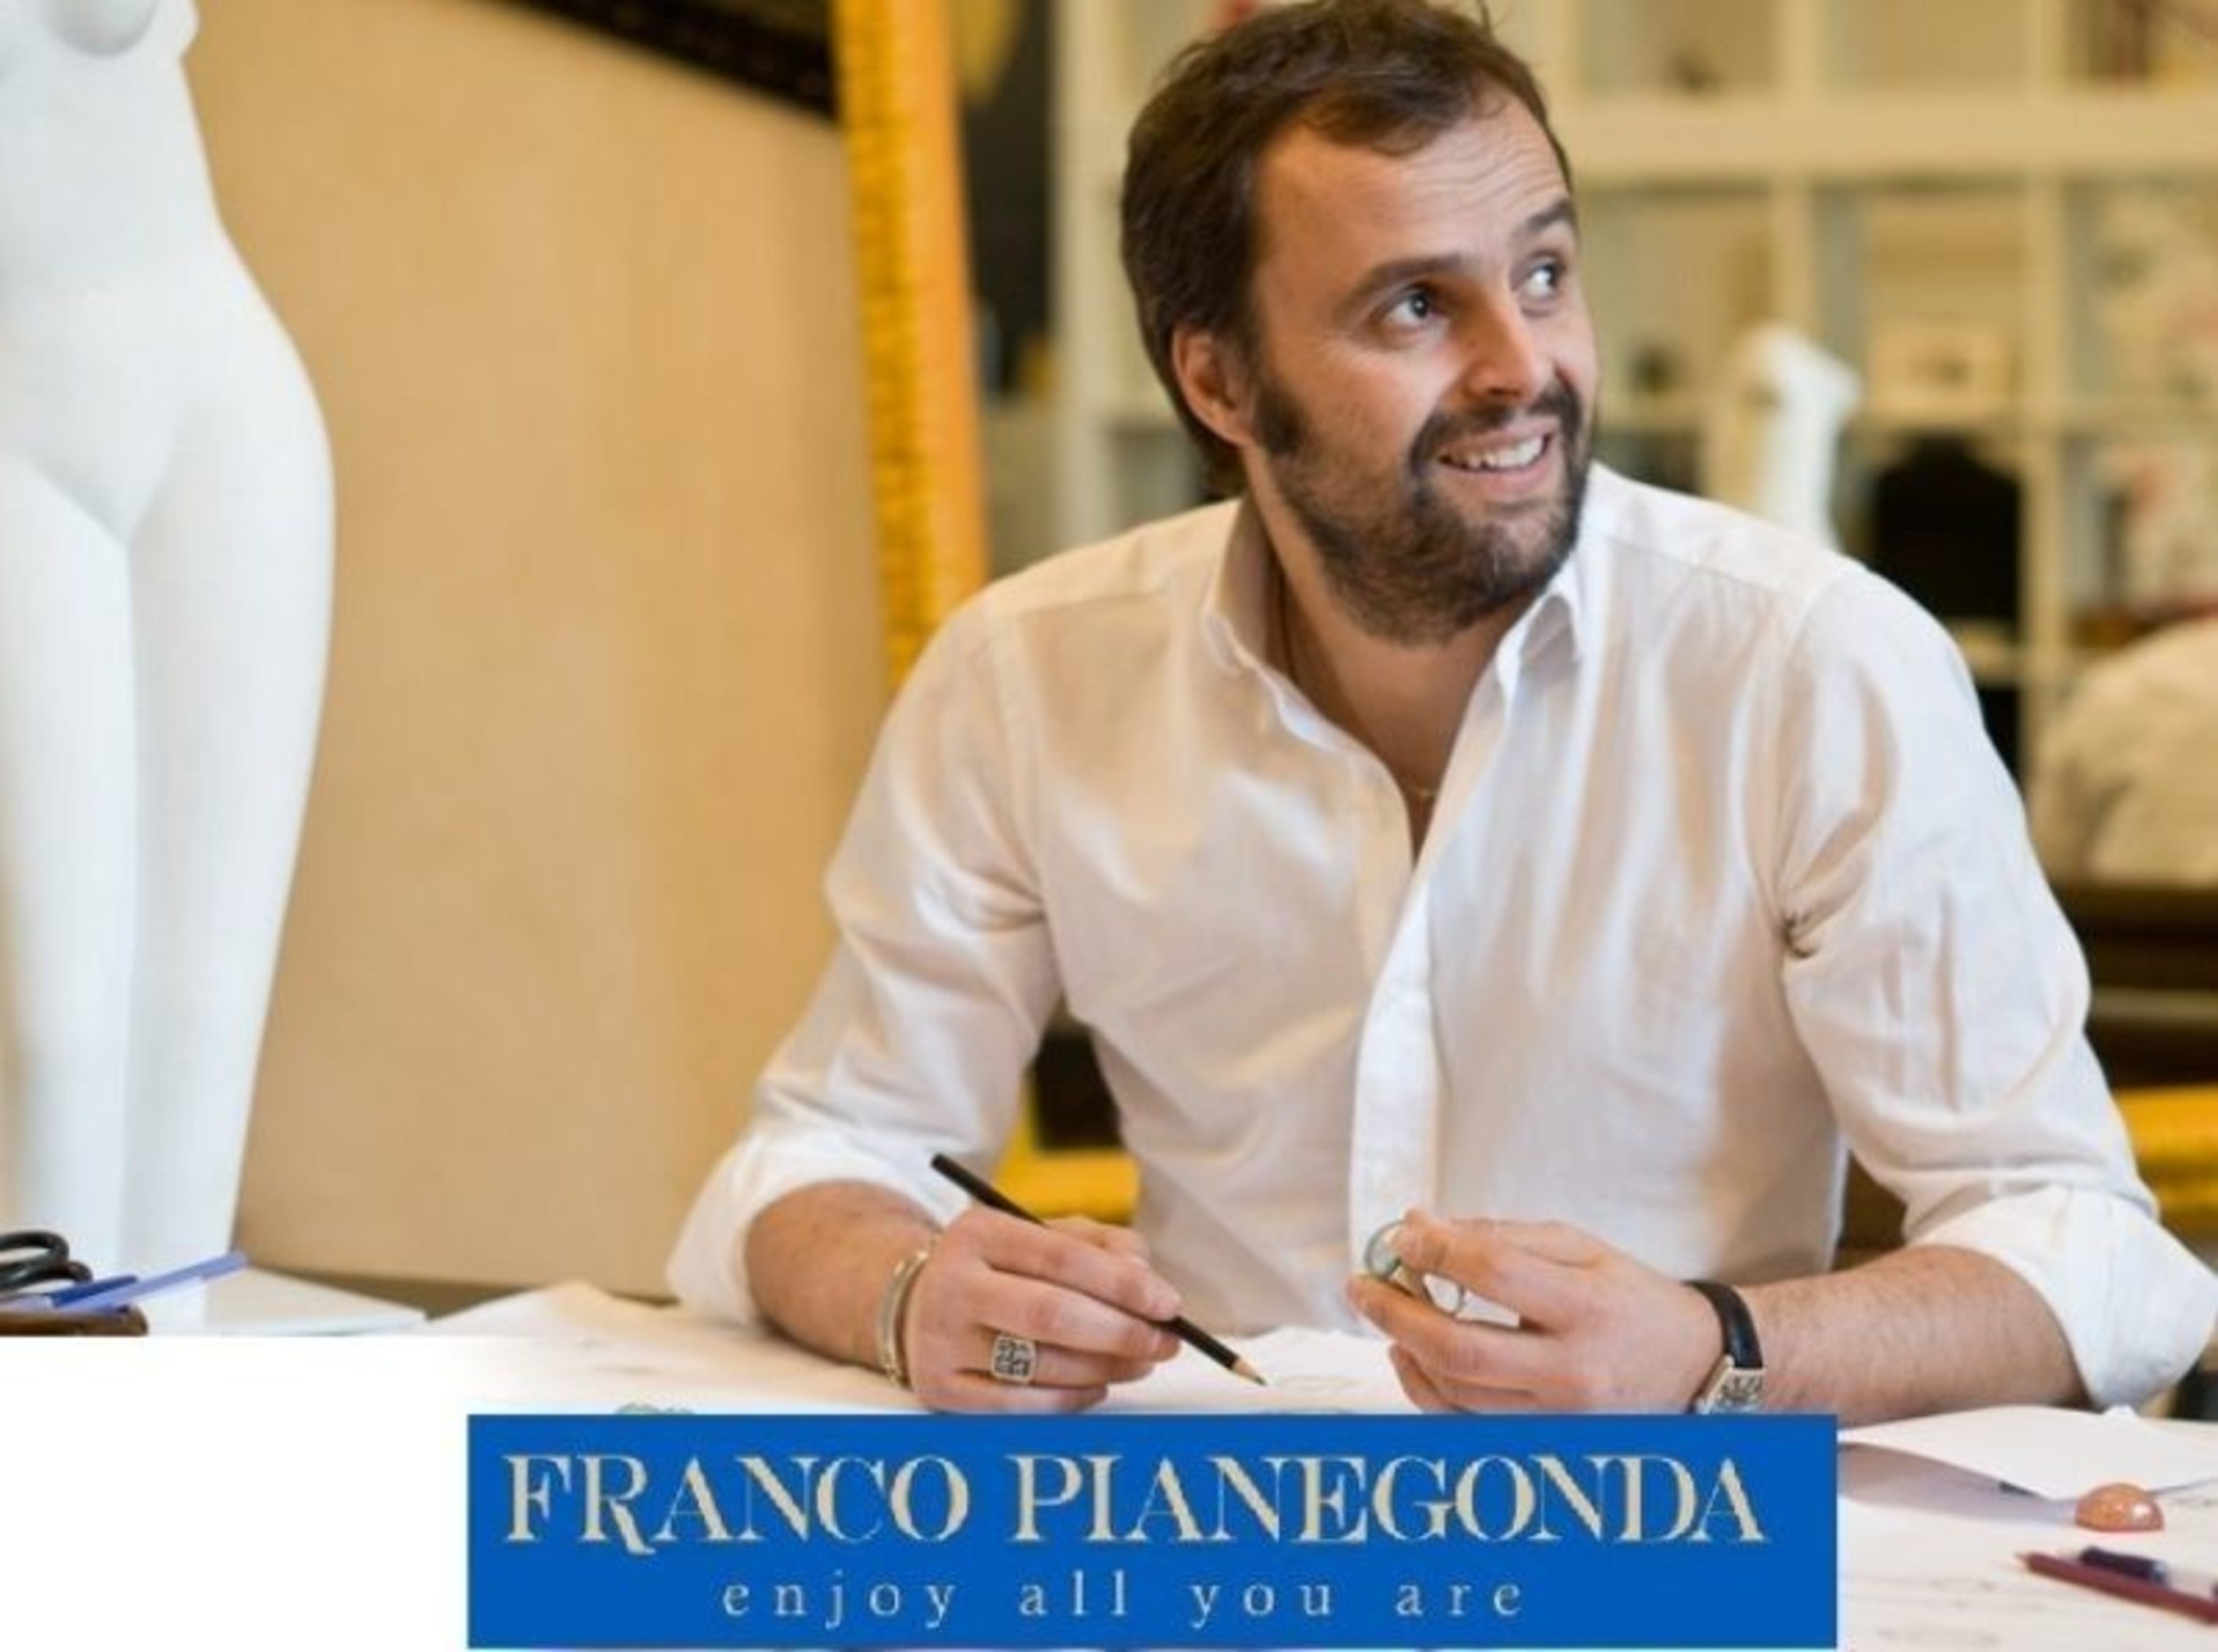 Franco Pianegonda to sell his fine jewelry exclusively online through his website. The fine Italian talented designer announced his will to discontinue traditional distribution to stores in favour of his online website. (PRNewsFoto/La Maison Franco Pianegonda)